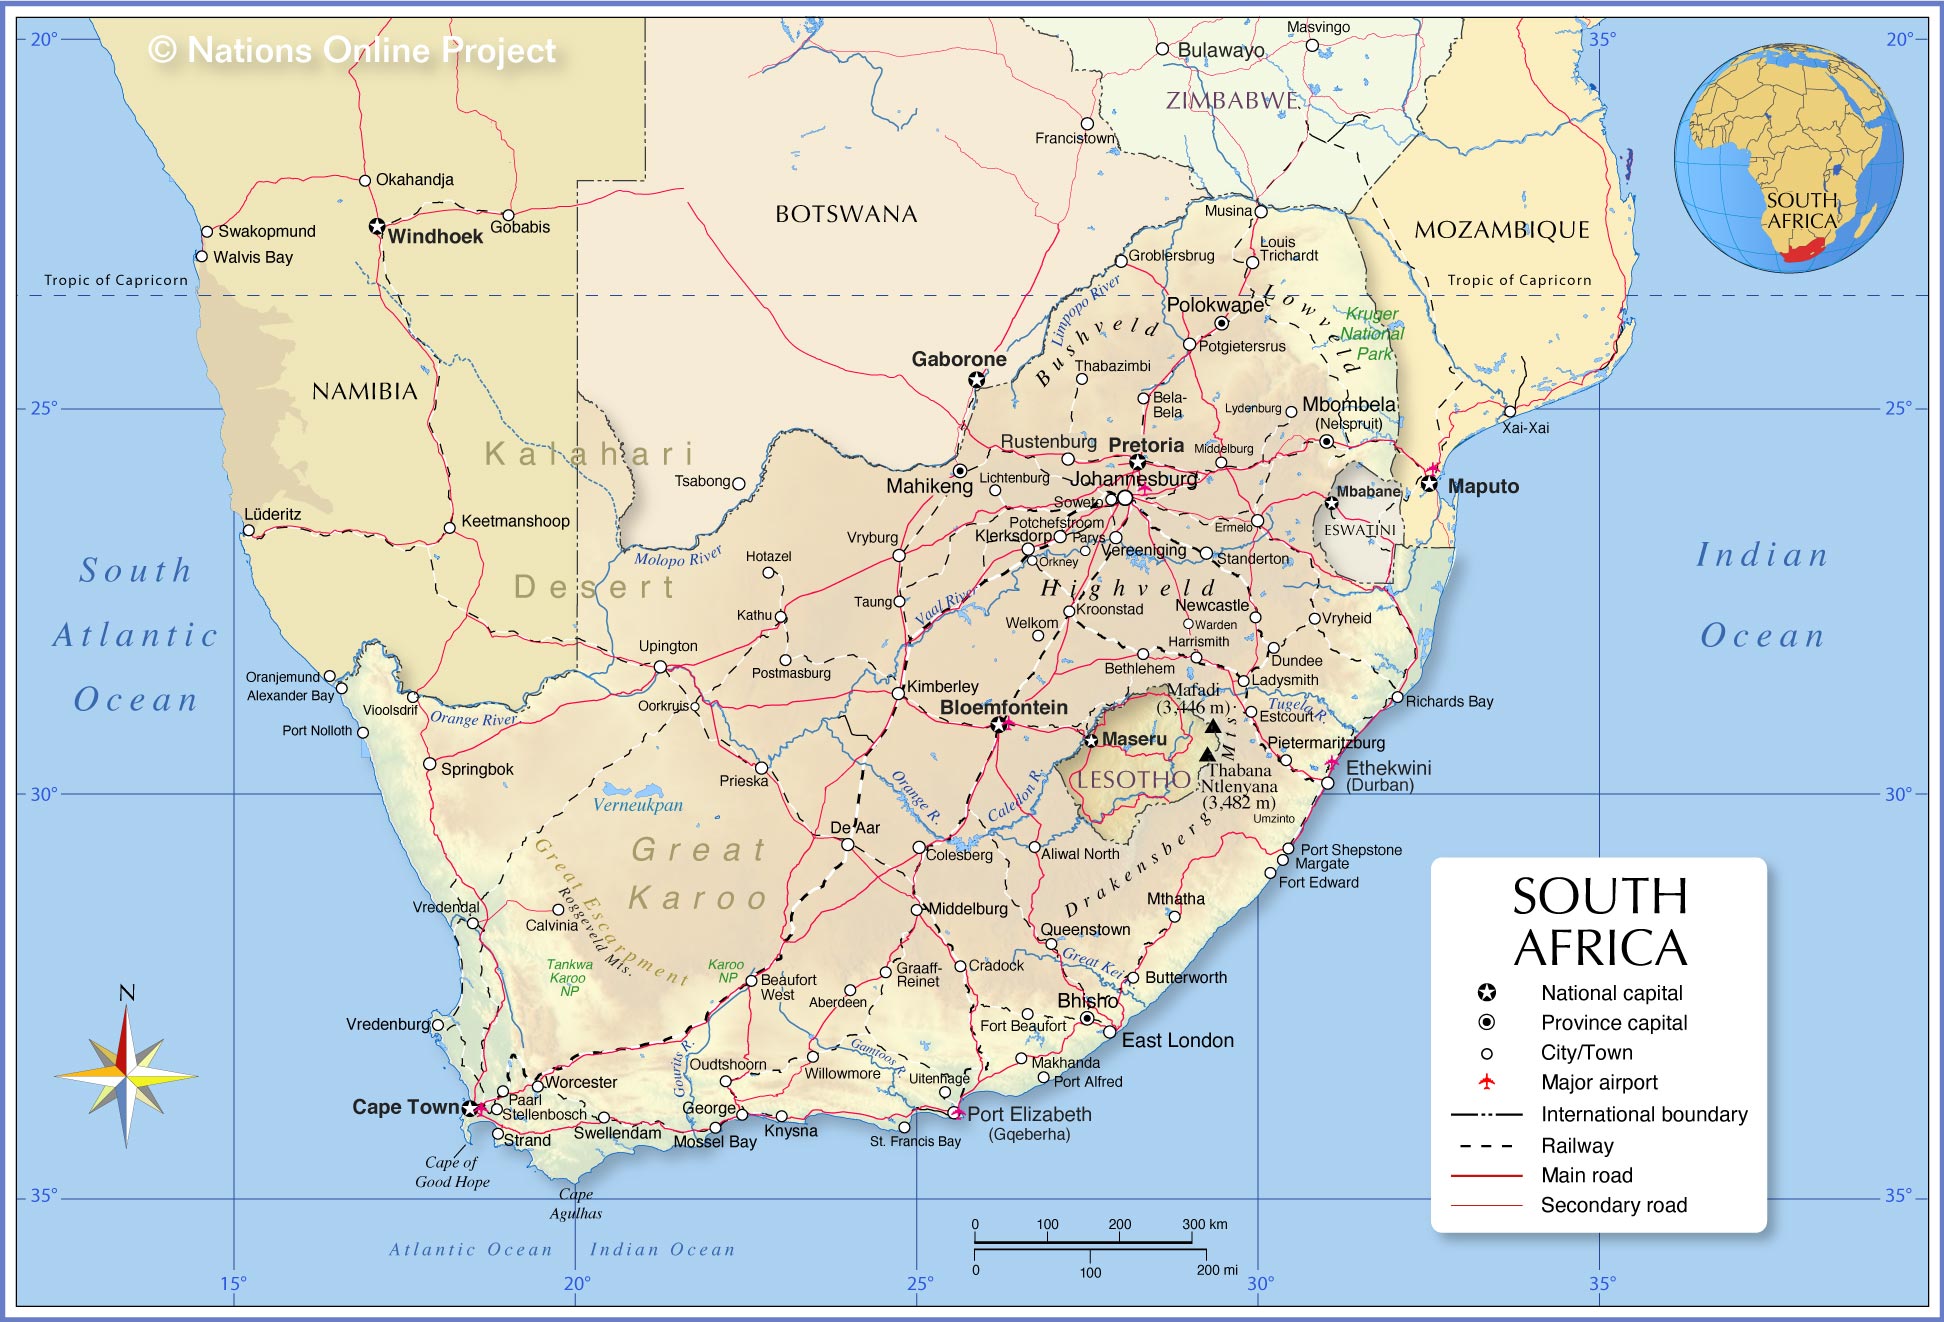 South Africa Main Cities Map